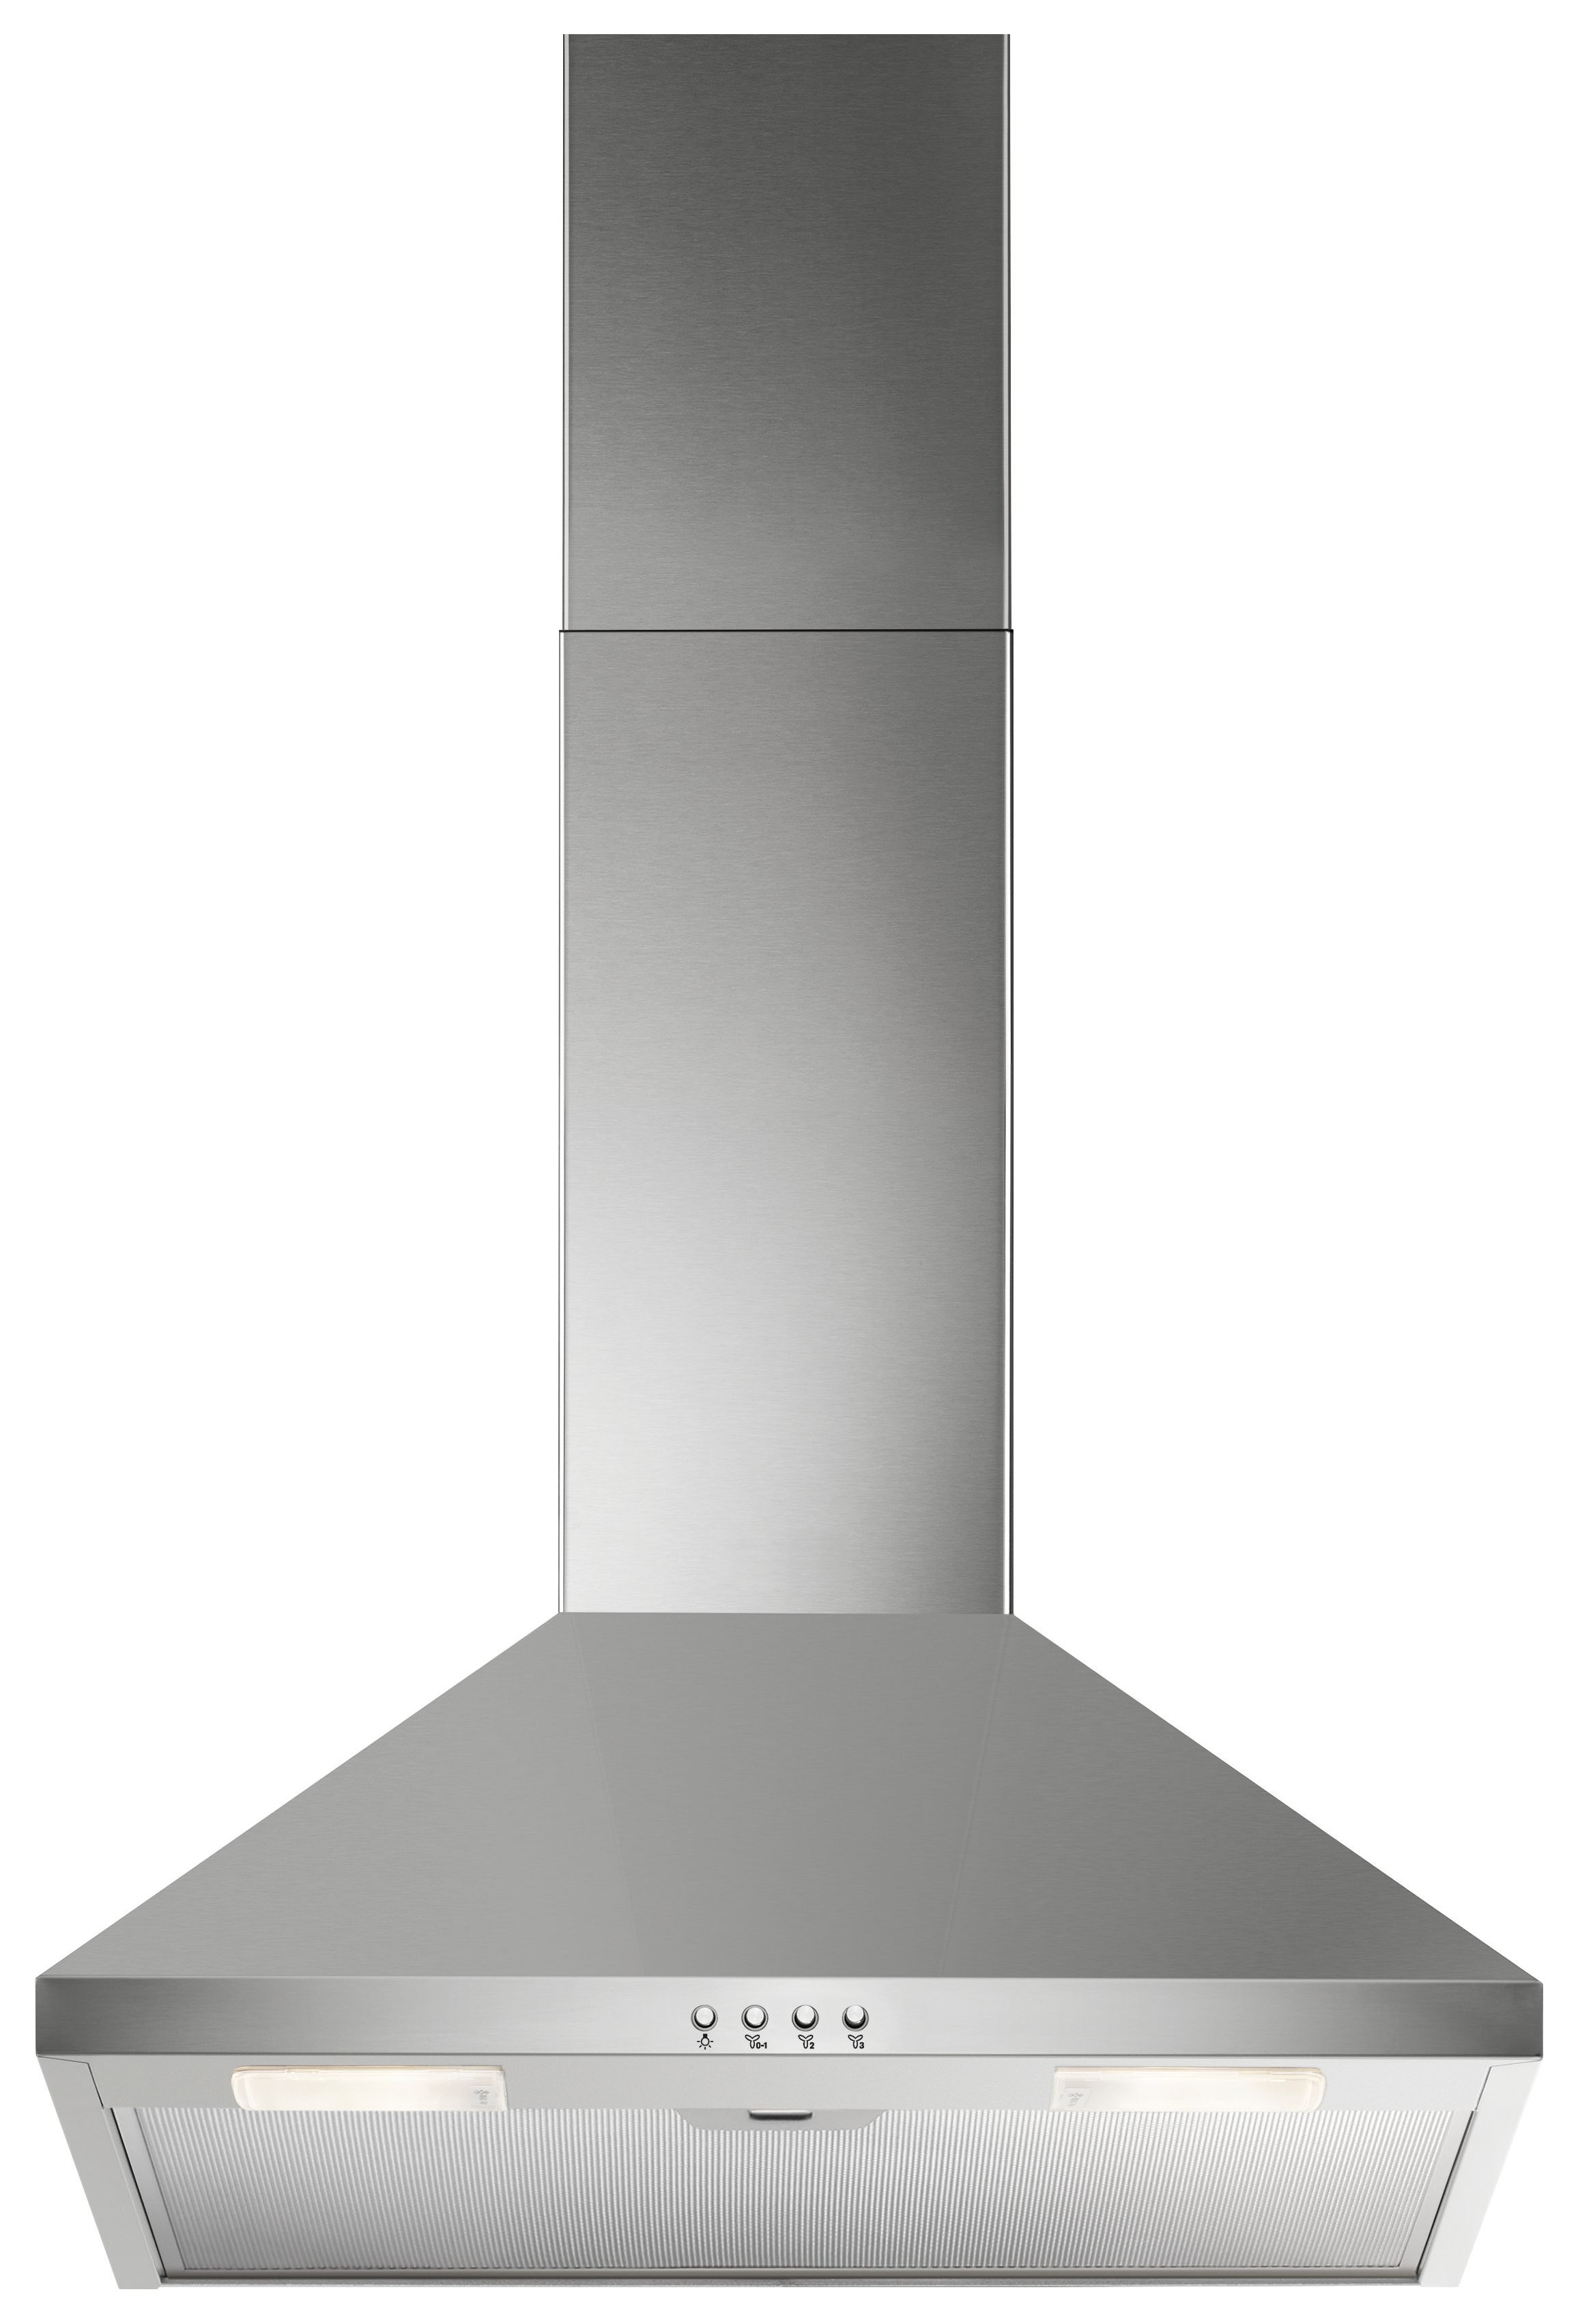 Electrolux 60cm EFC316X Cooker Hood - Stainless Steel